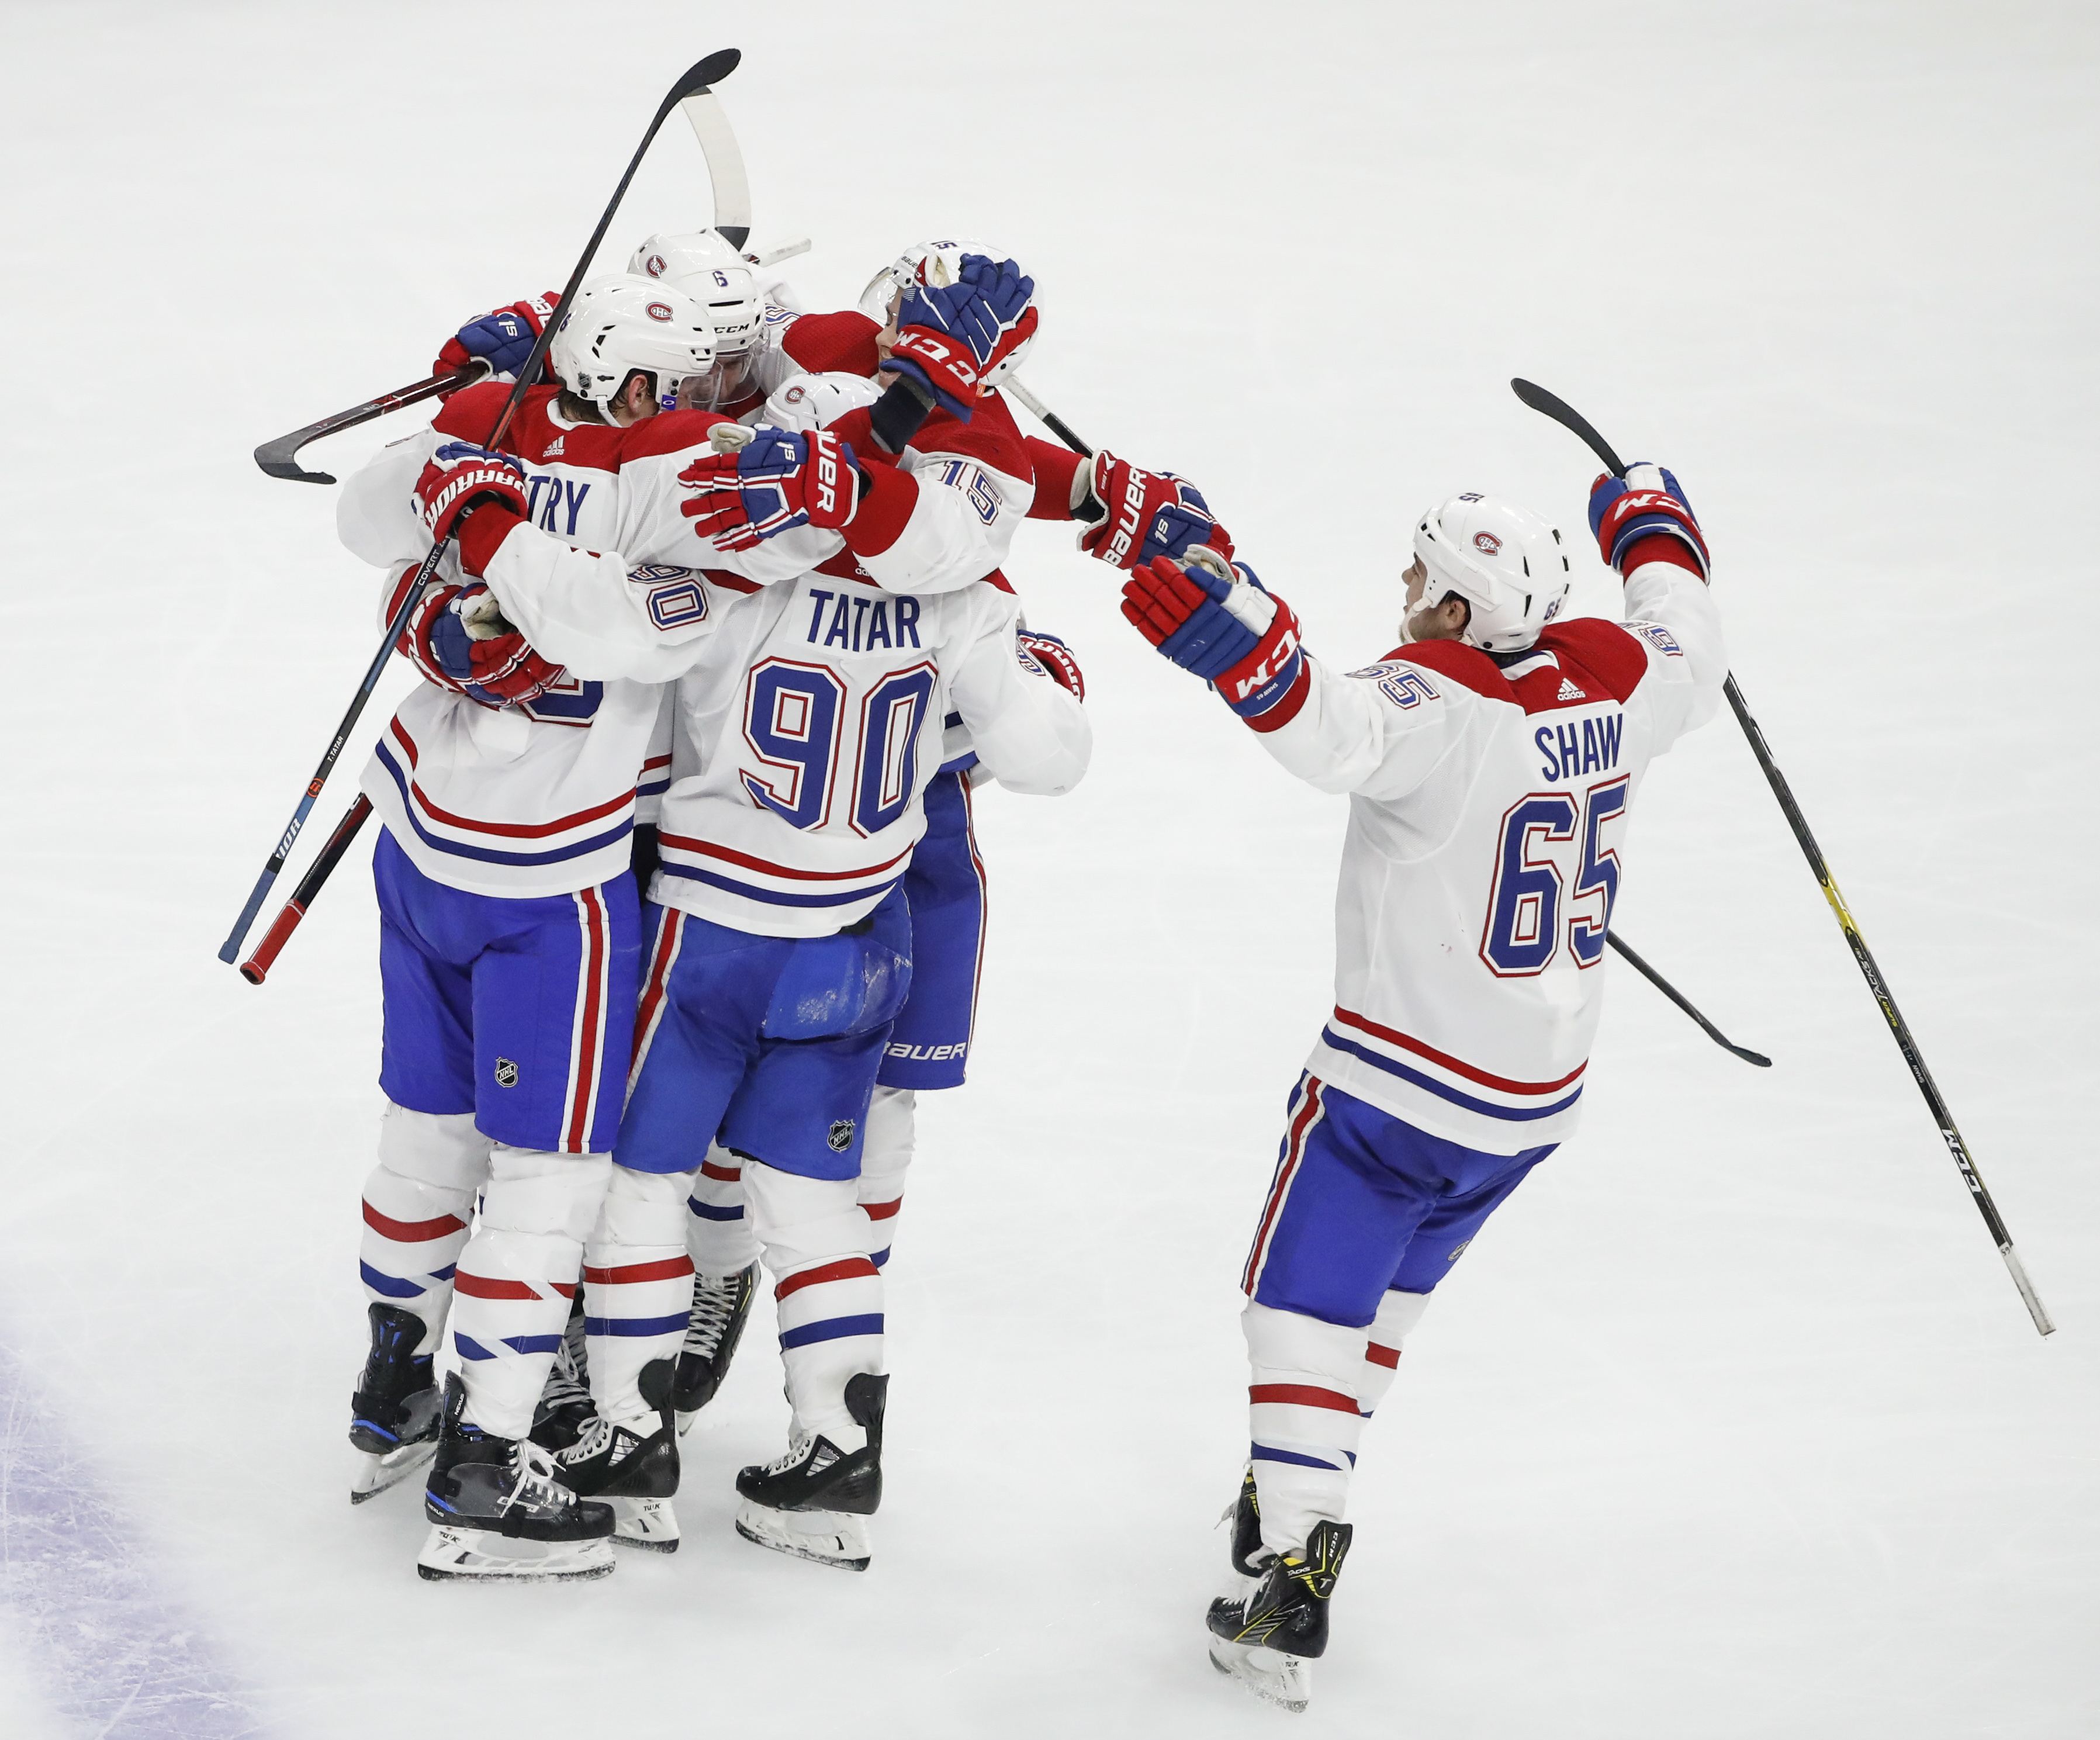 Tatar’s late goal lifts Canadiens over Blackhawks